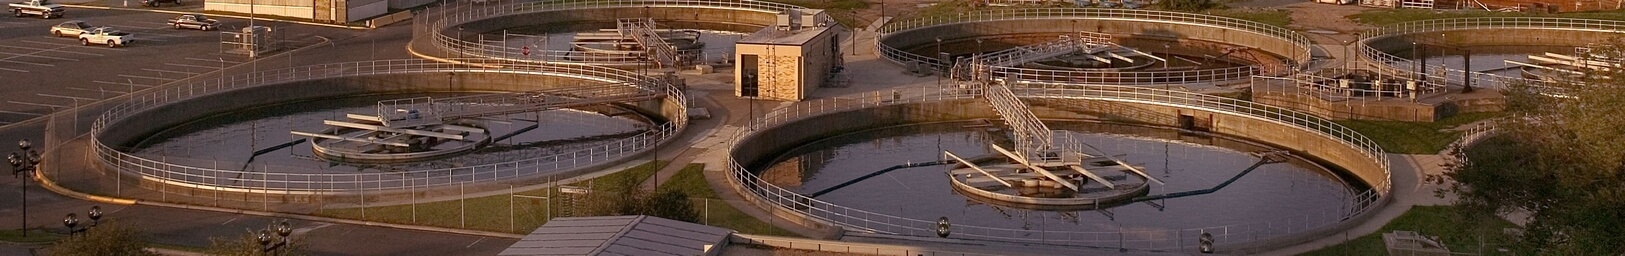 Sunset over waste water treatment works